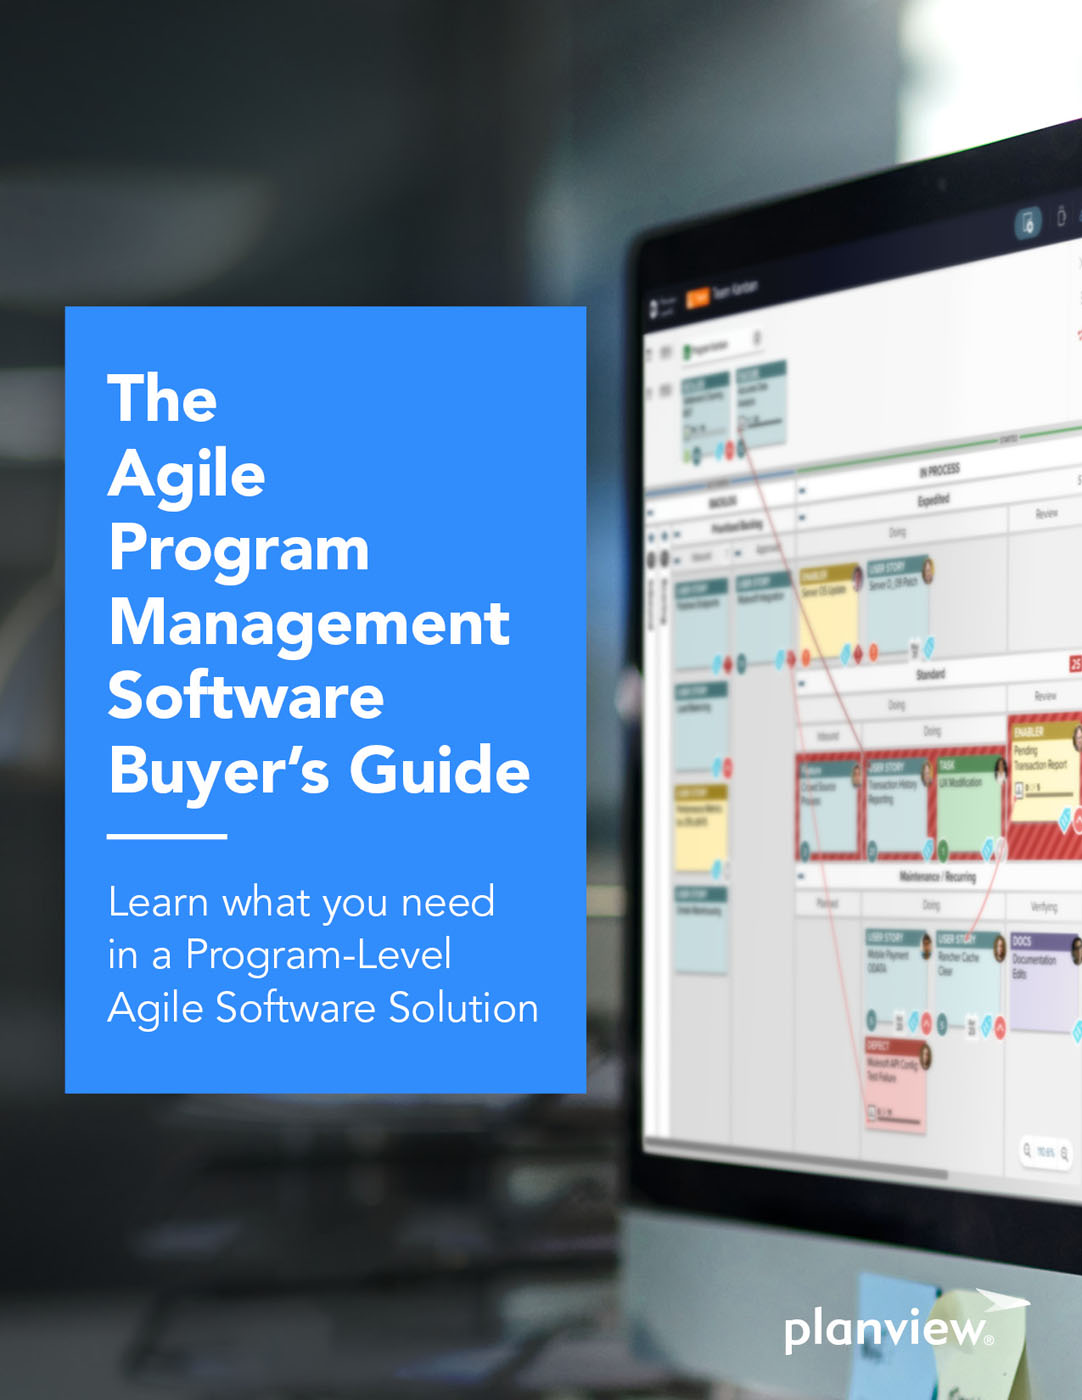 The Agile Program Management Buyer's Guide